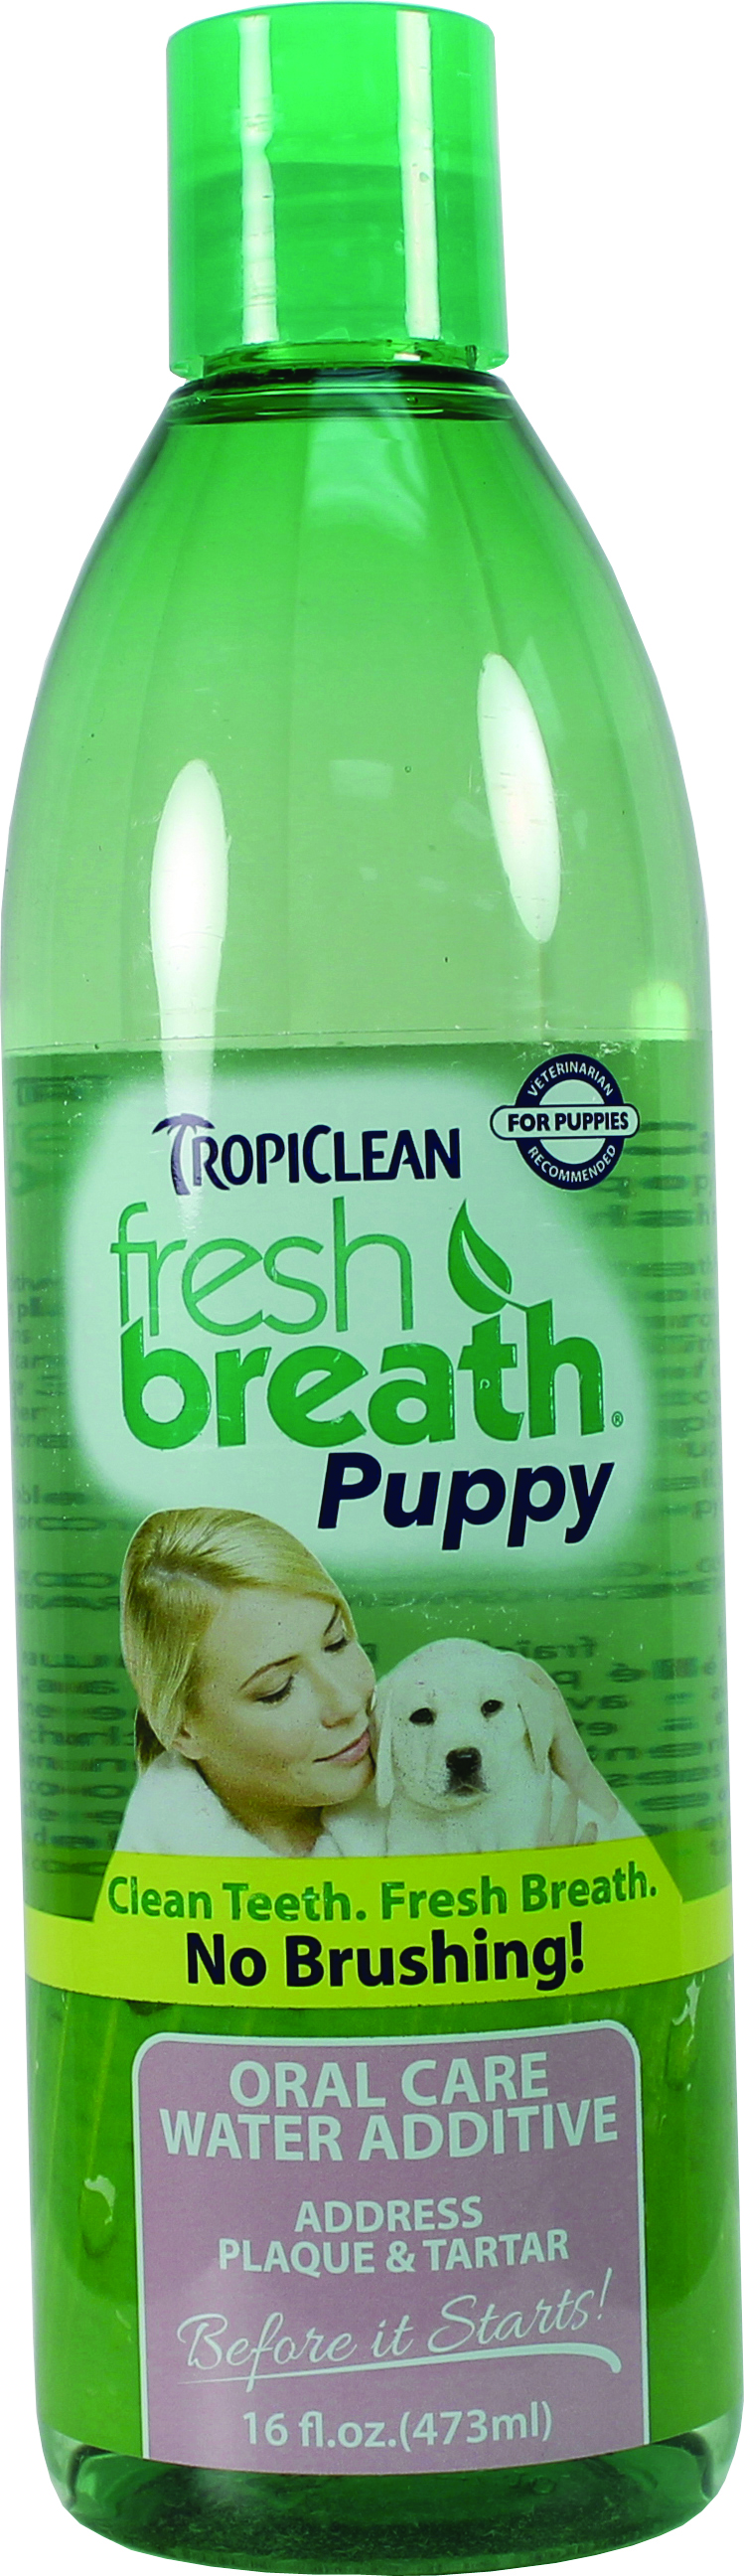 FRESH BREATH ORAL CARE WATER ADDITIVE FOR PUPPIES